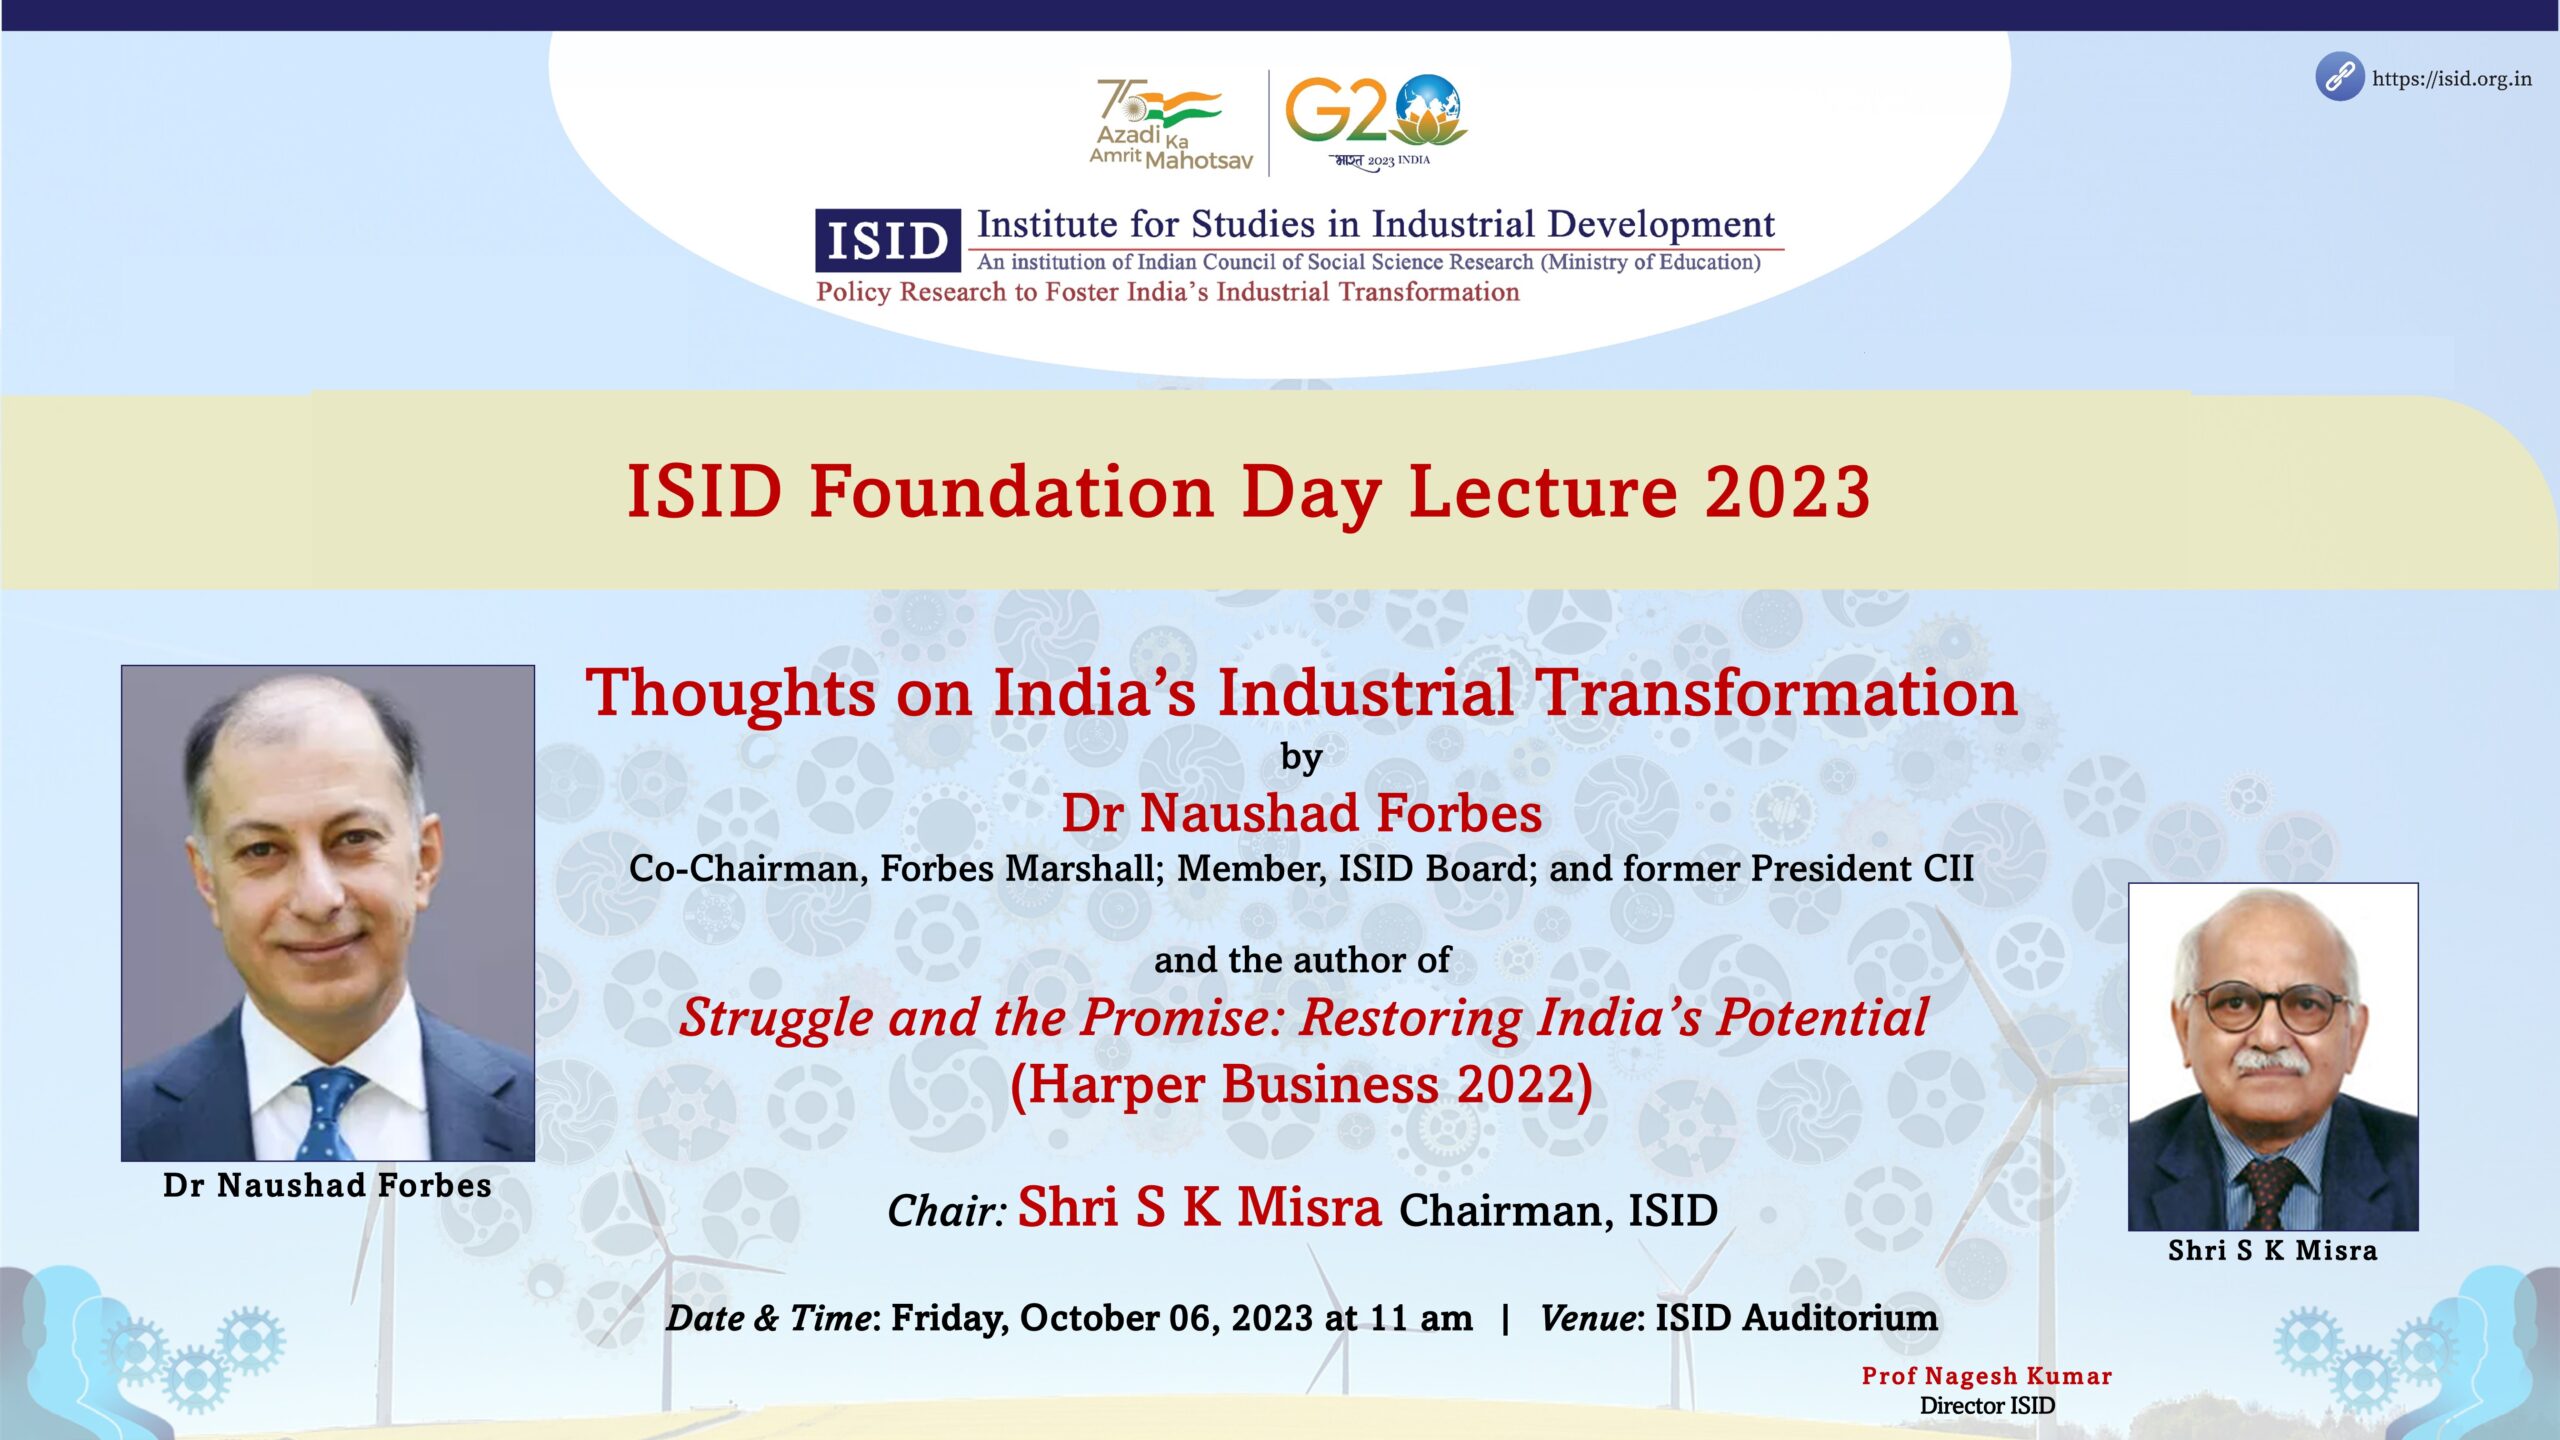 ISID Foundation Day Lecture 2023 by Dr Naushad Forbes, Forbes Marshall